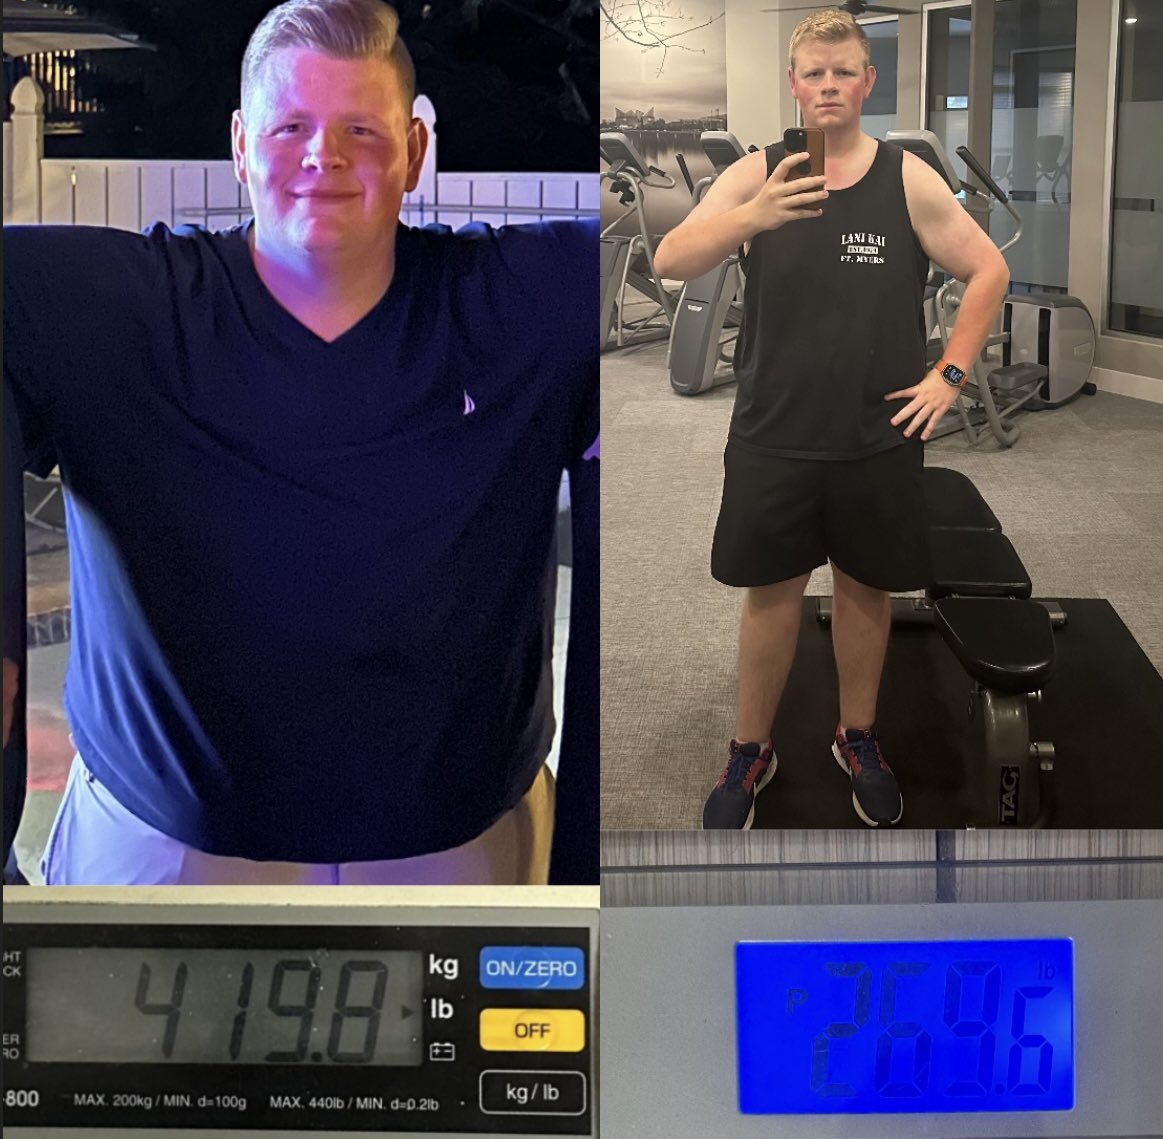 I know no one probably gives af but another huge milestone hit today. Officially 150 lbs down with 120 of that being since September. No surgeries, no drugs just lots of hard work and dedication. Still got a ways to go but getting better everyday. #LFG